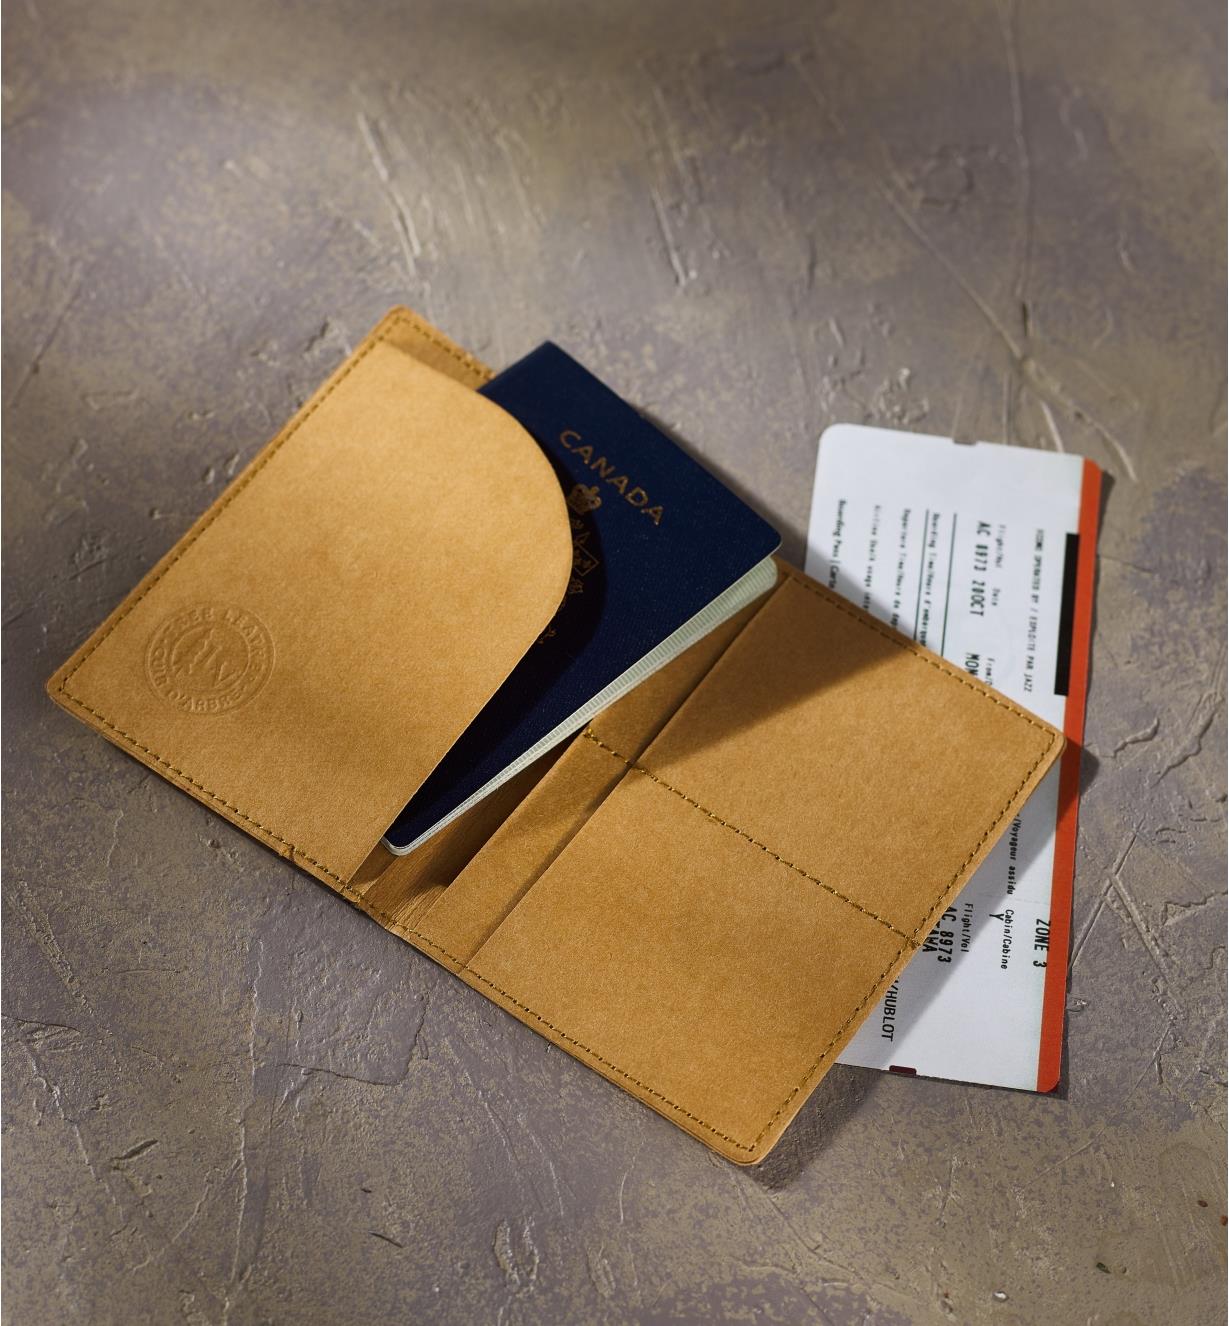 The tree leather passport wallet containing a passport